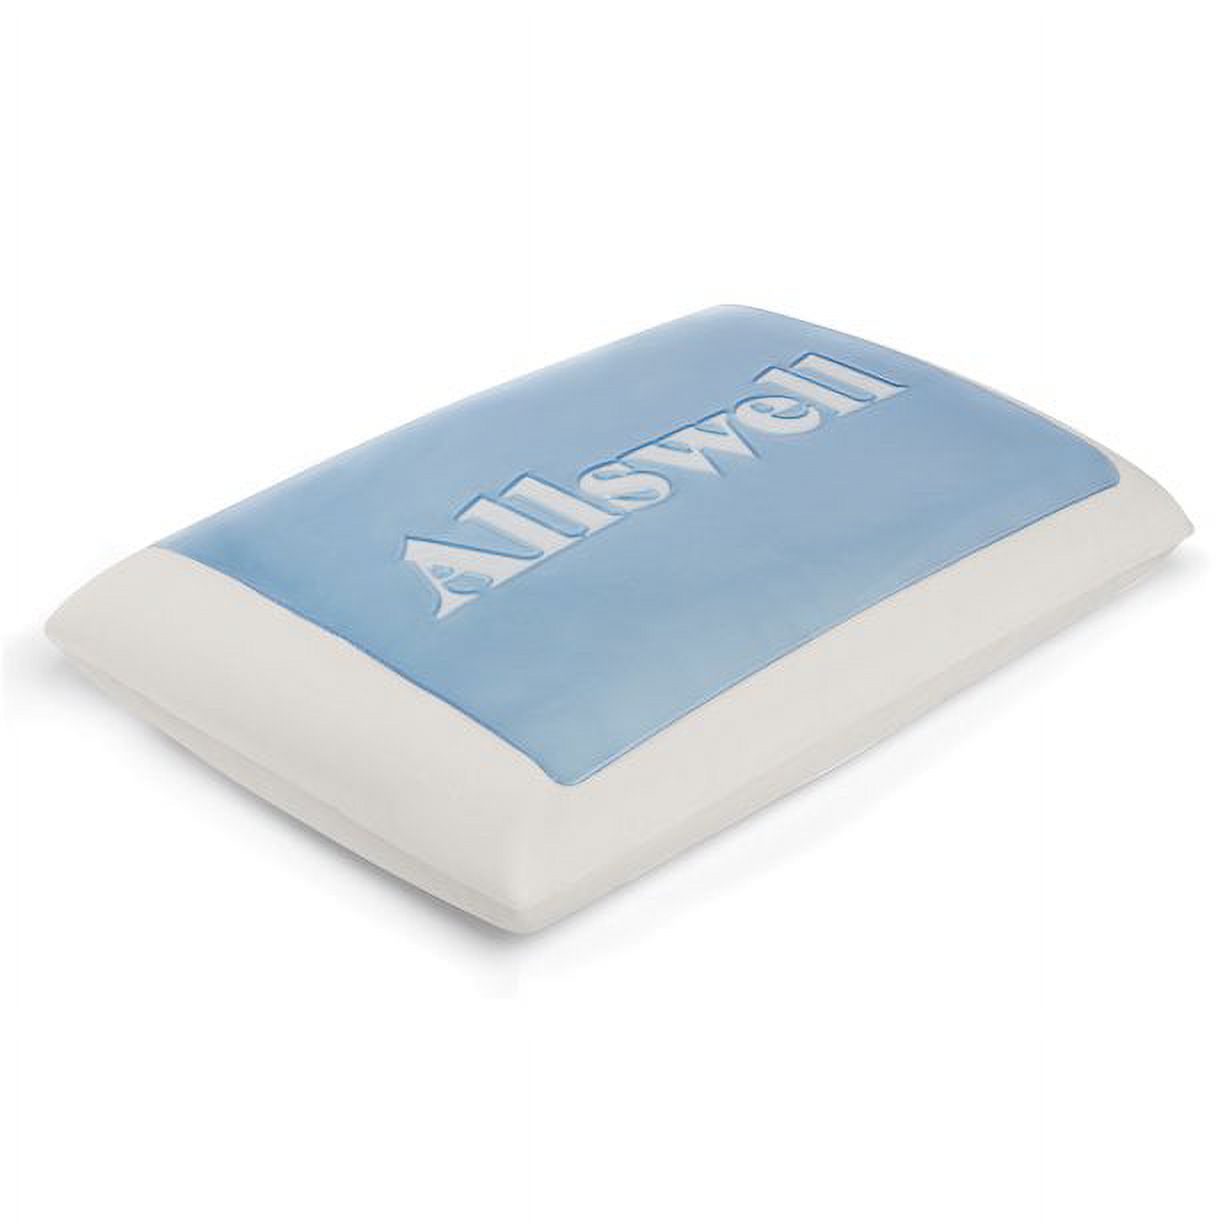 Allswell Cooling Gel Memory Foam Pillow, Queen Size - image 3 of 8